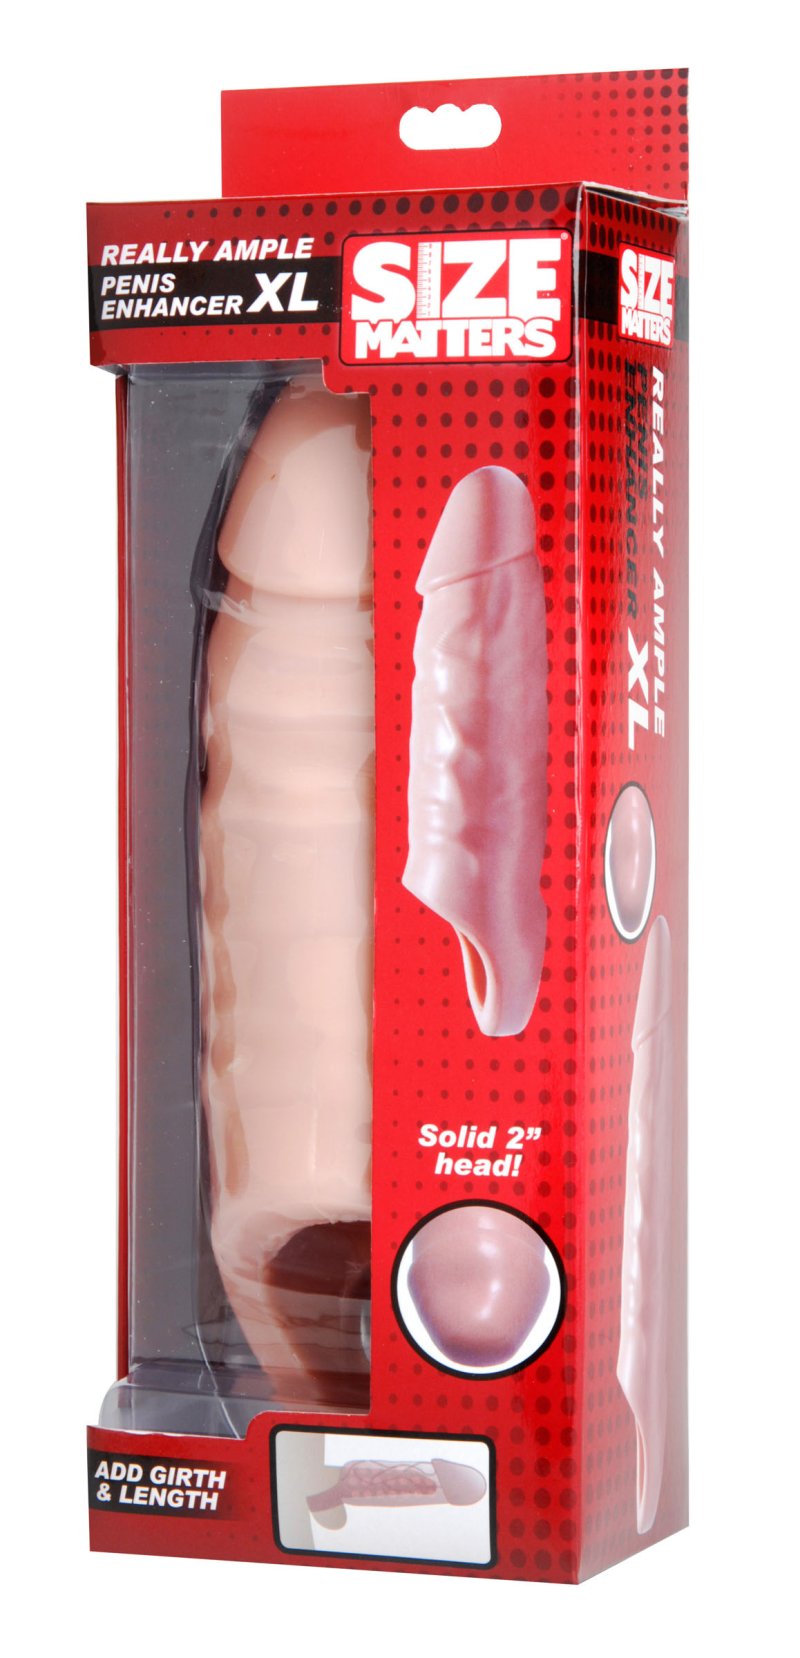 Size Matters - Really Ample XL Penis Enhancer Sheath